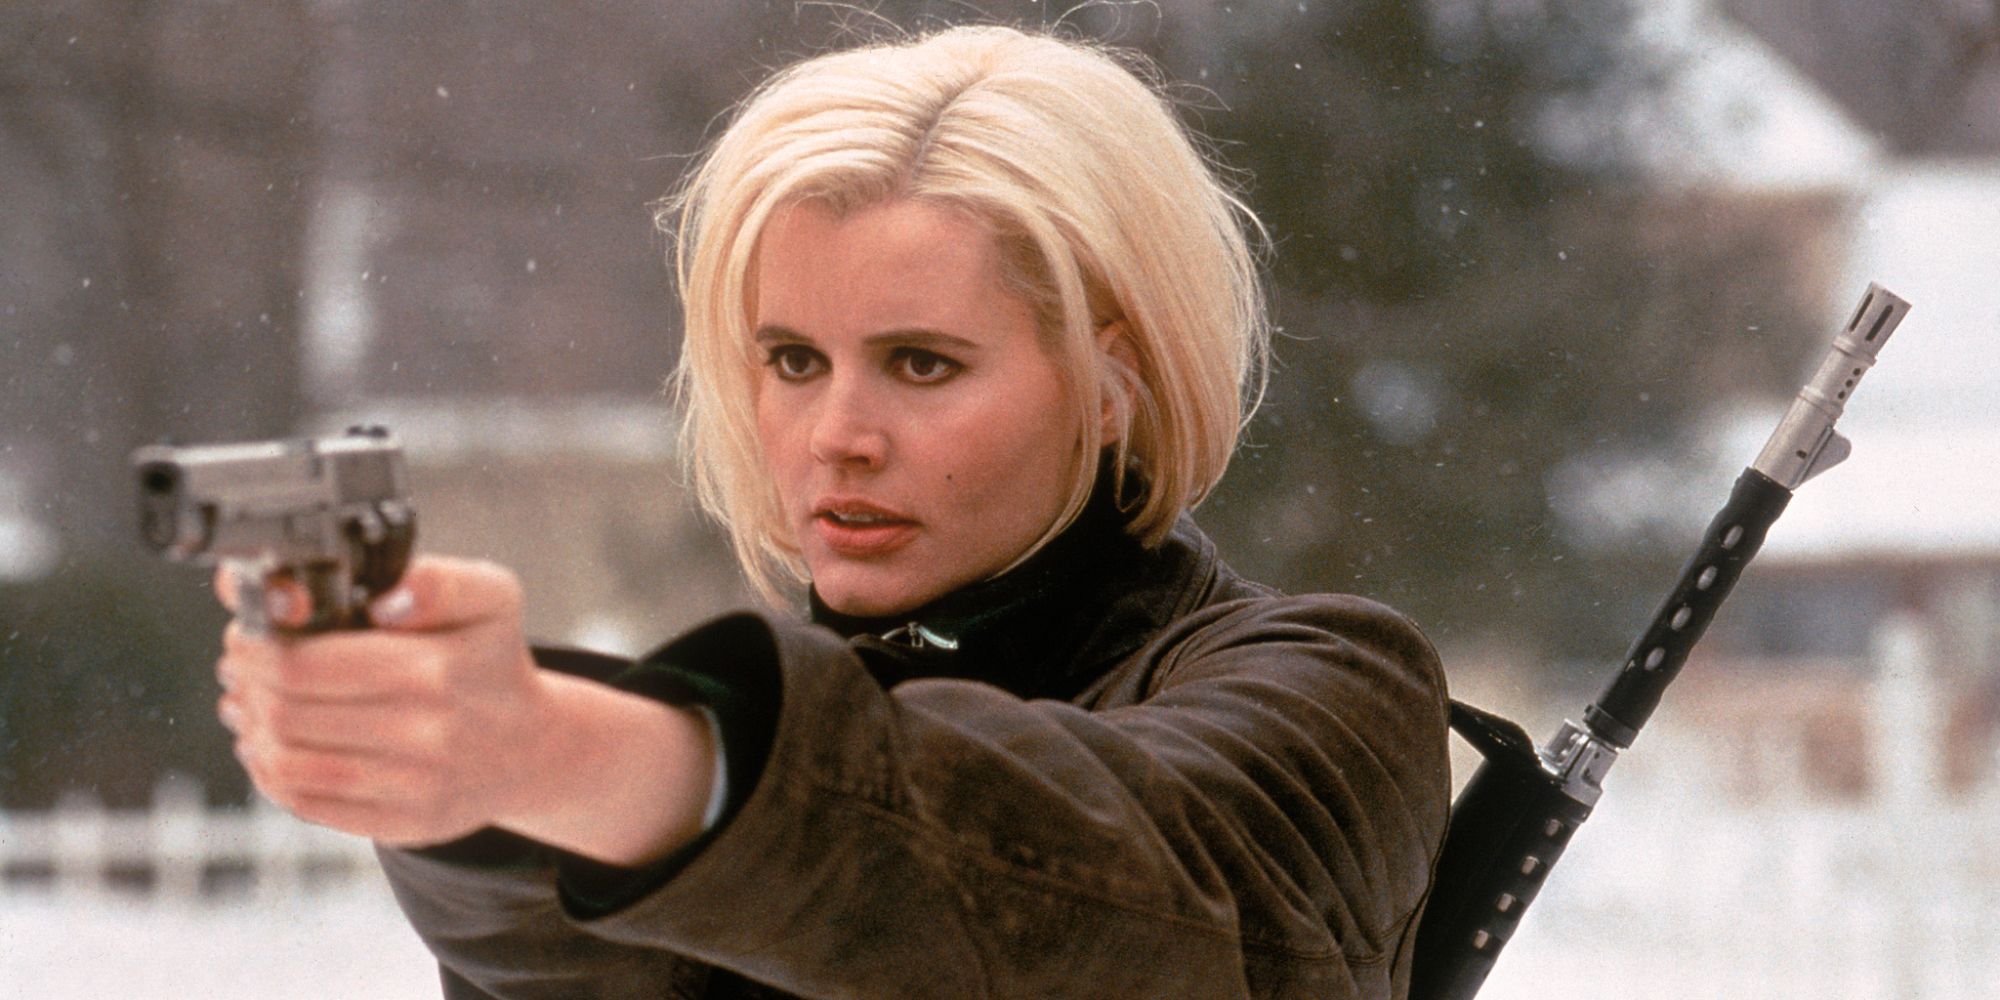 A blonde woman is aiming her gun at someone